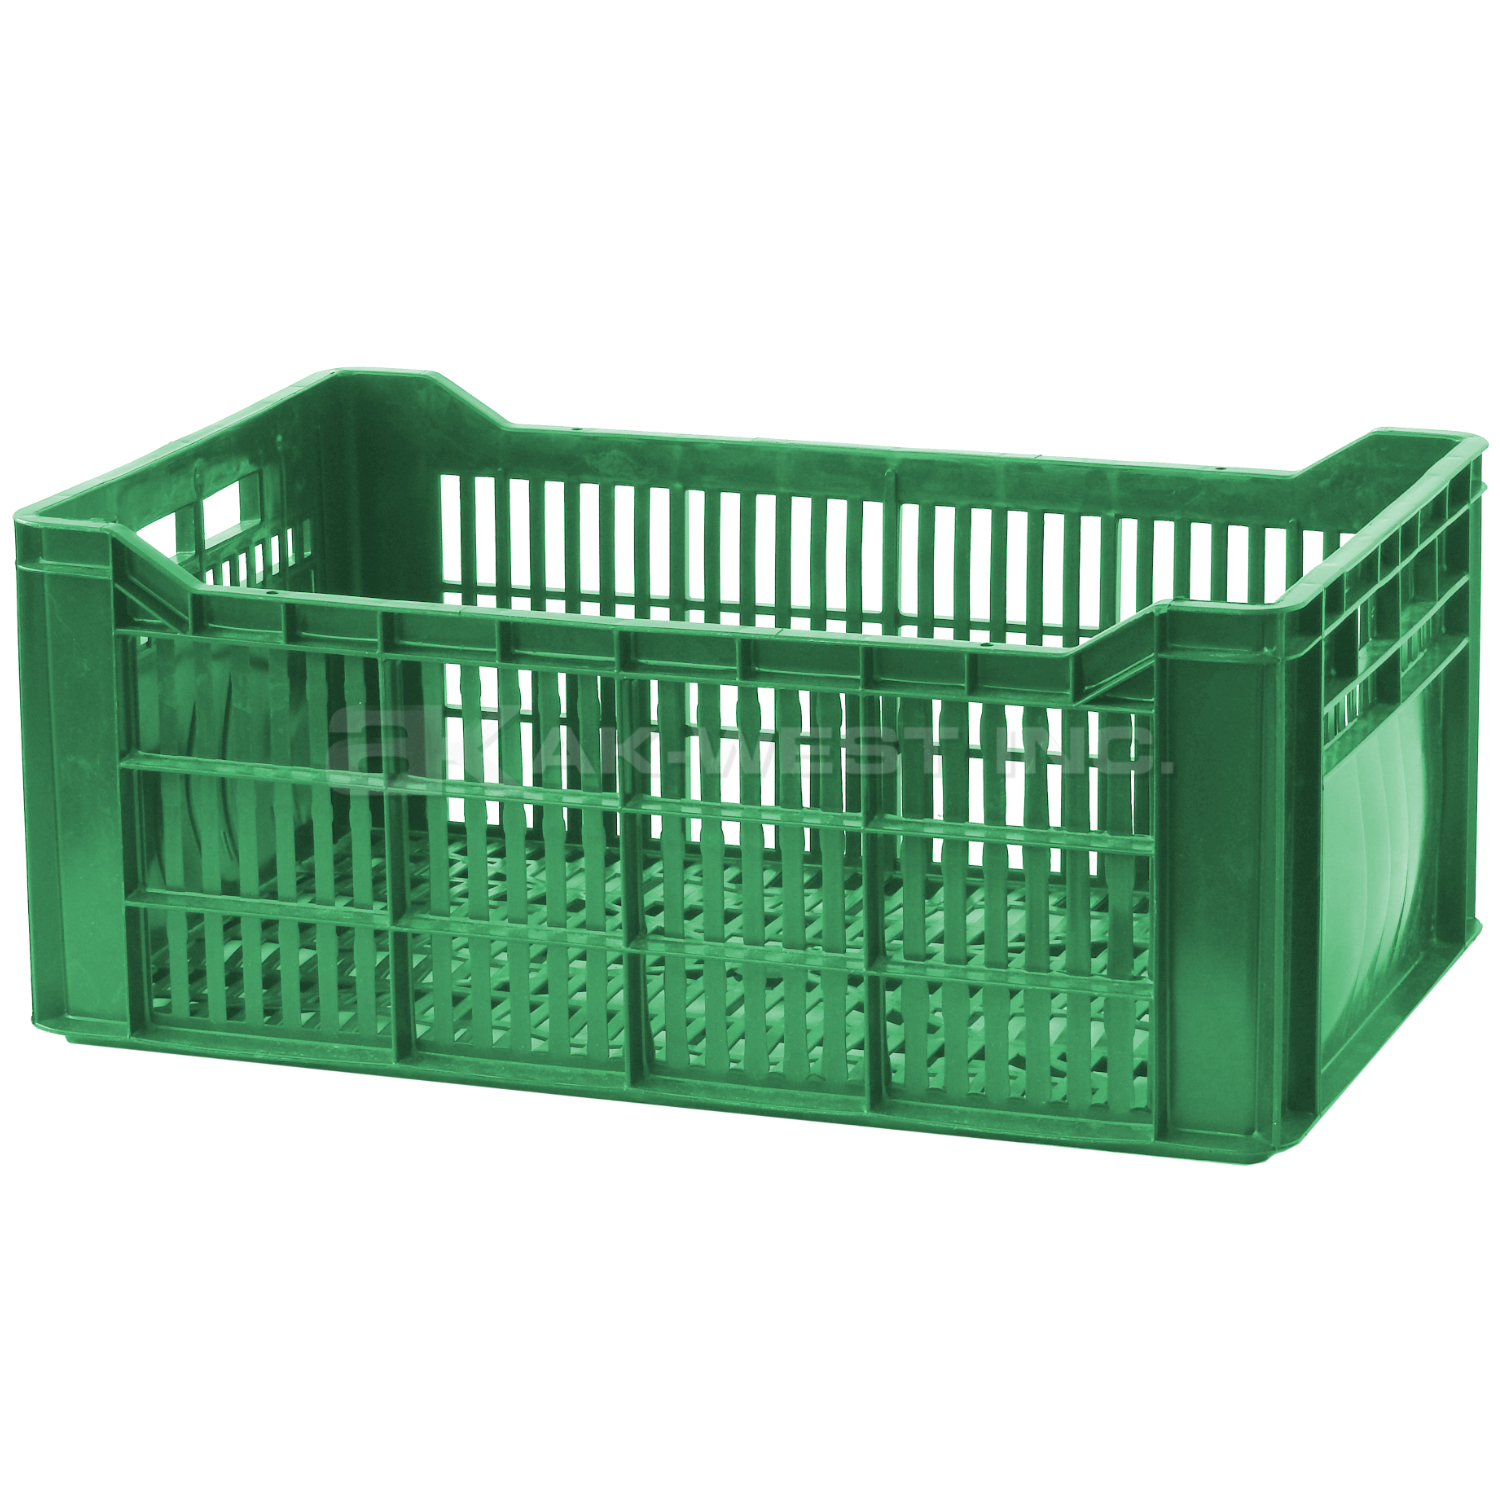 Green, 19"L x 12"W x 8"H Vented Multi-Use Fruit, Vegetable and Shellfish Container